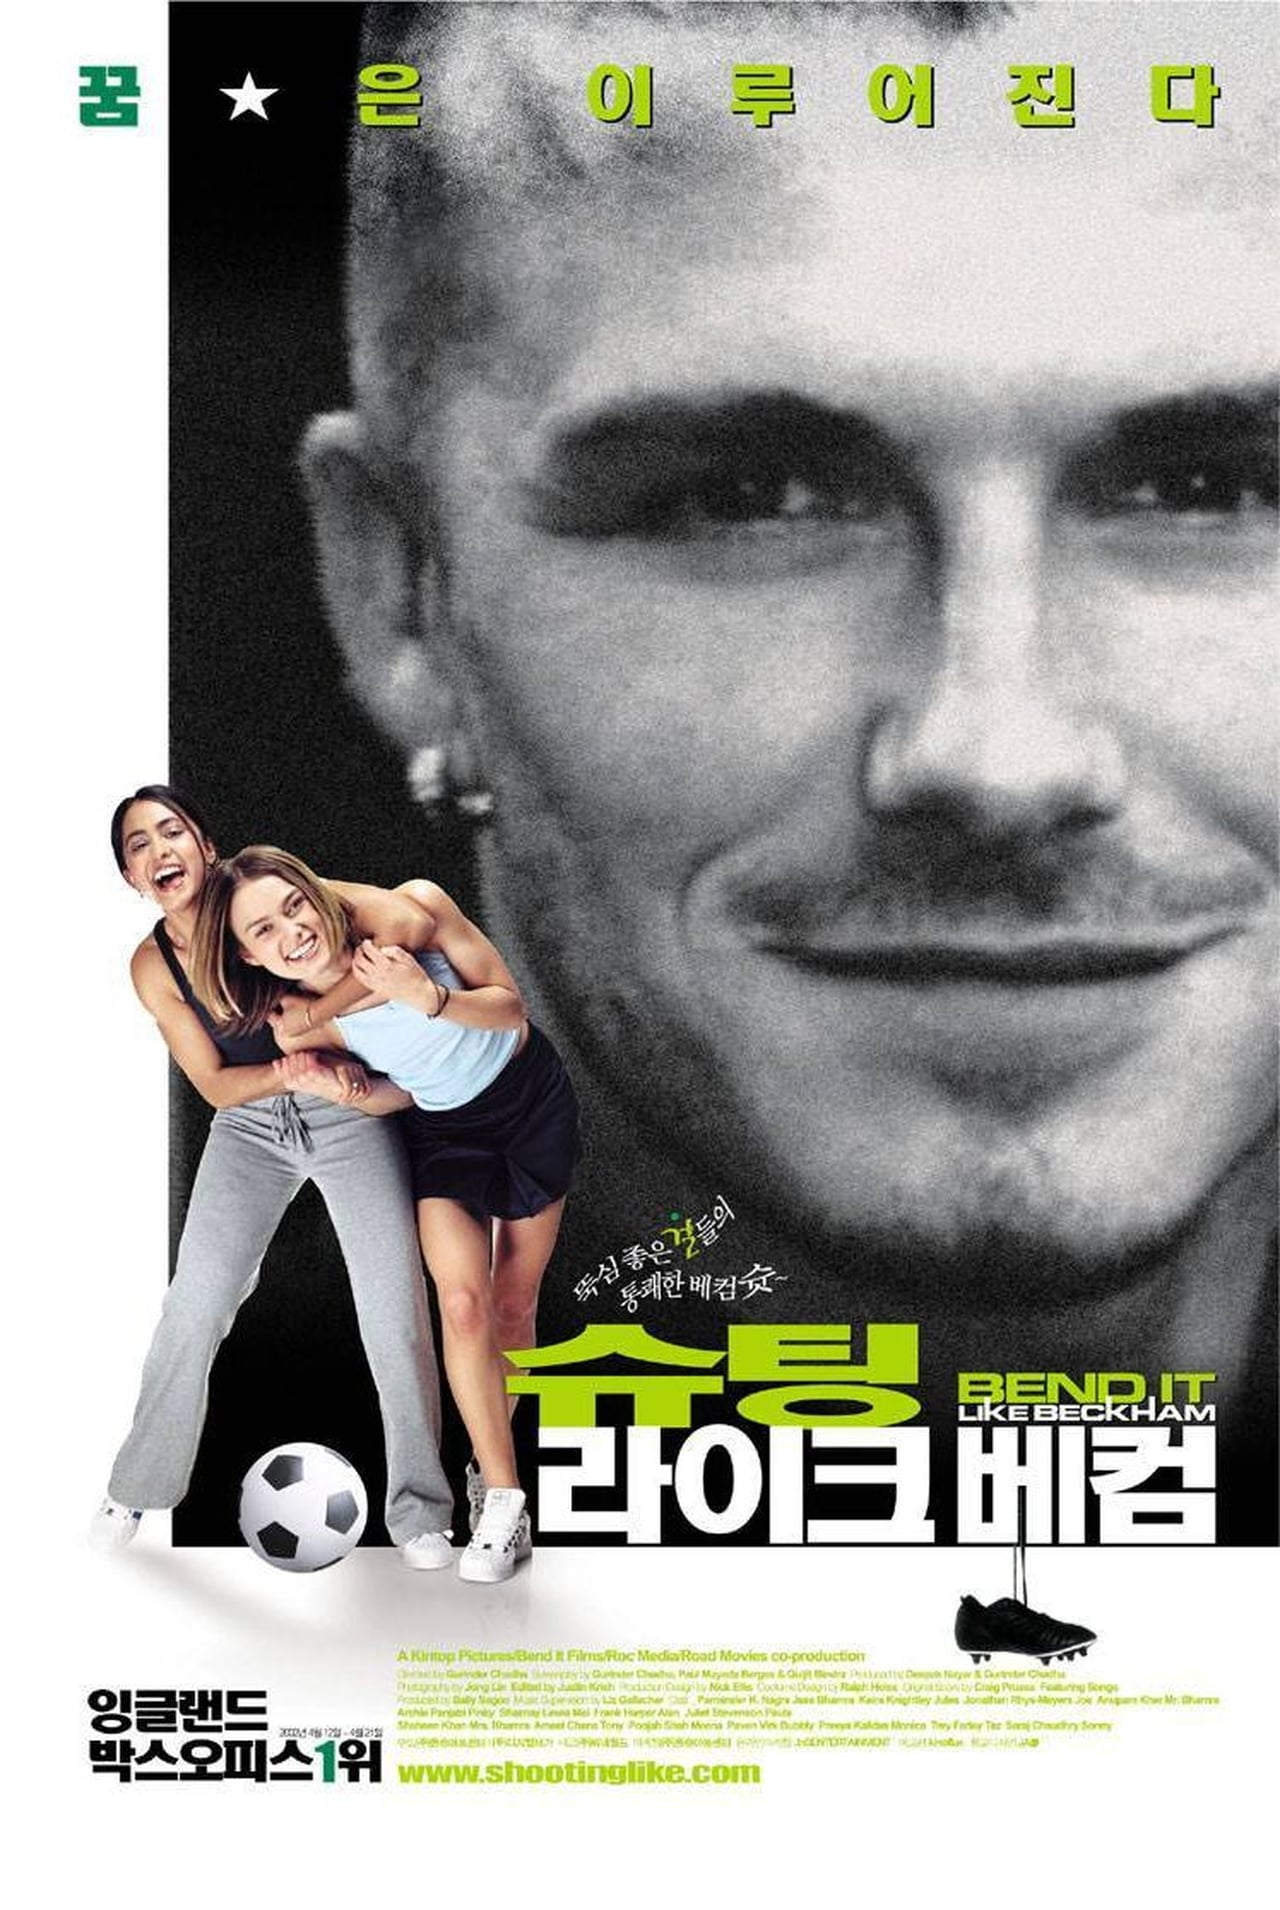 Bend It Like Beckham wiki, synopsis, reviews, watch and download - Ace Bhatti Bend It Like Beckham